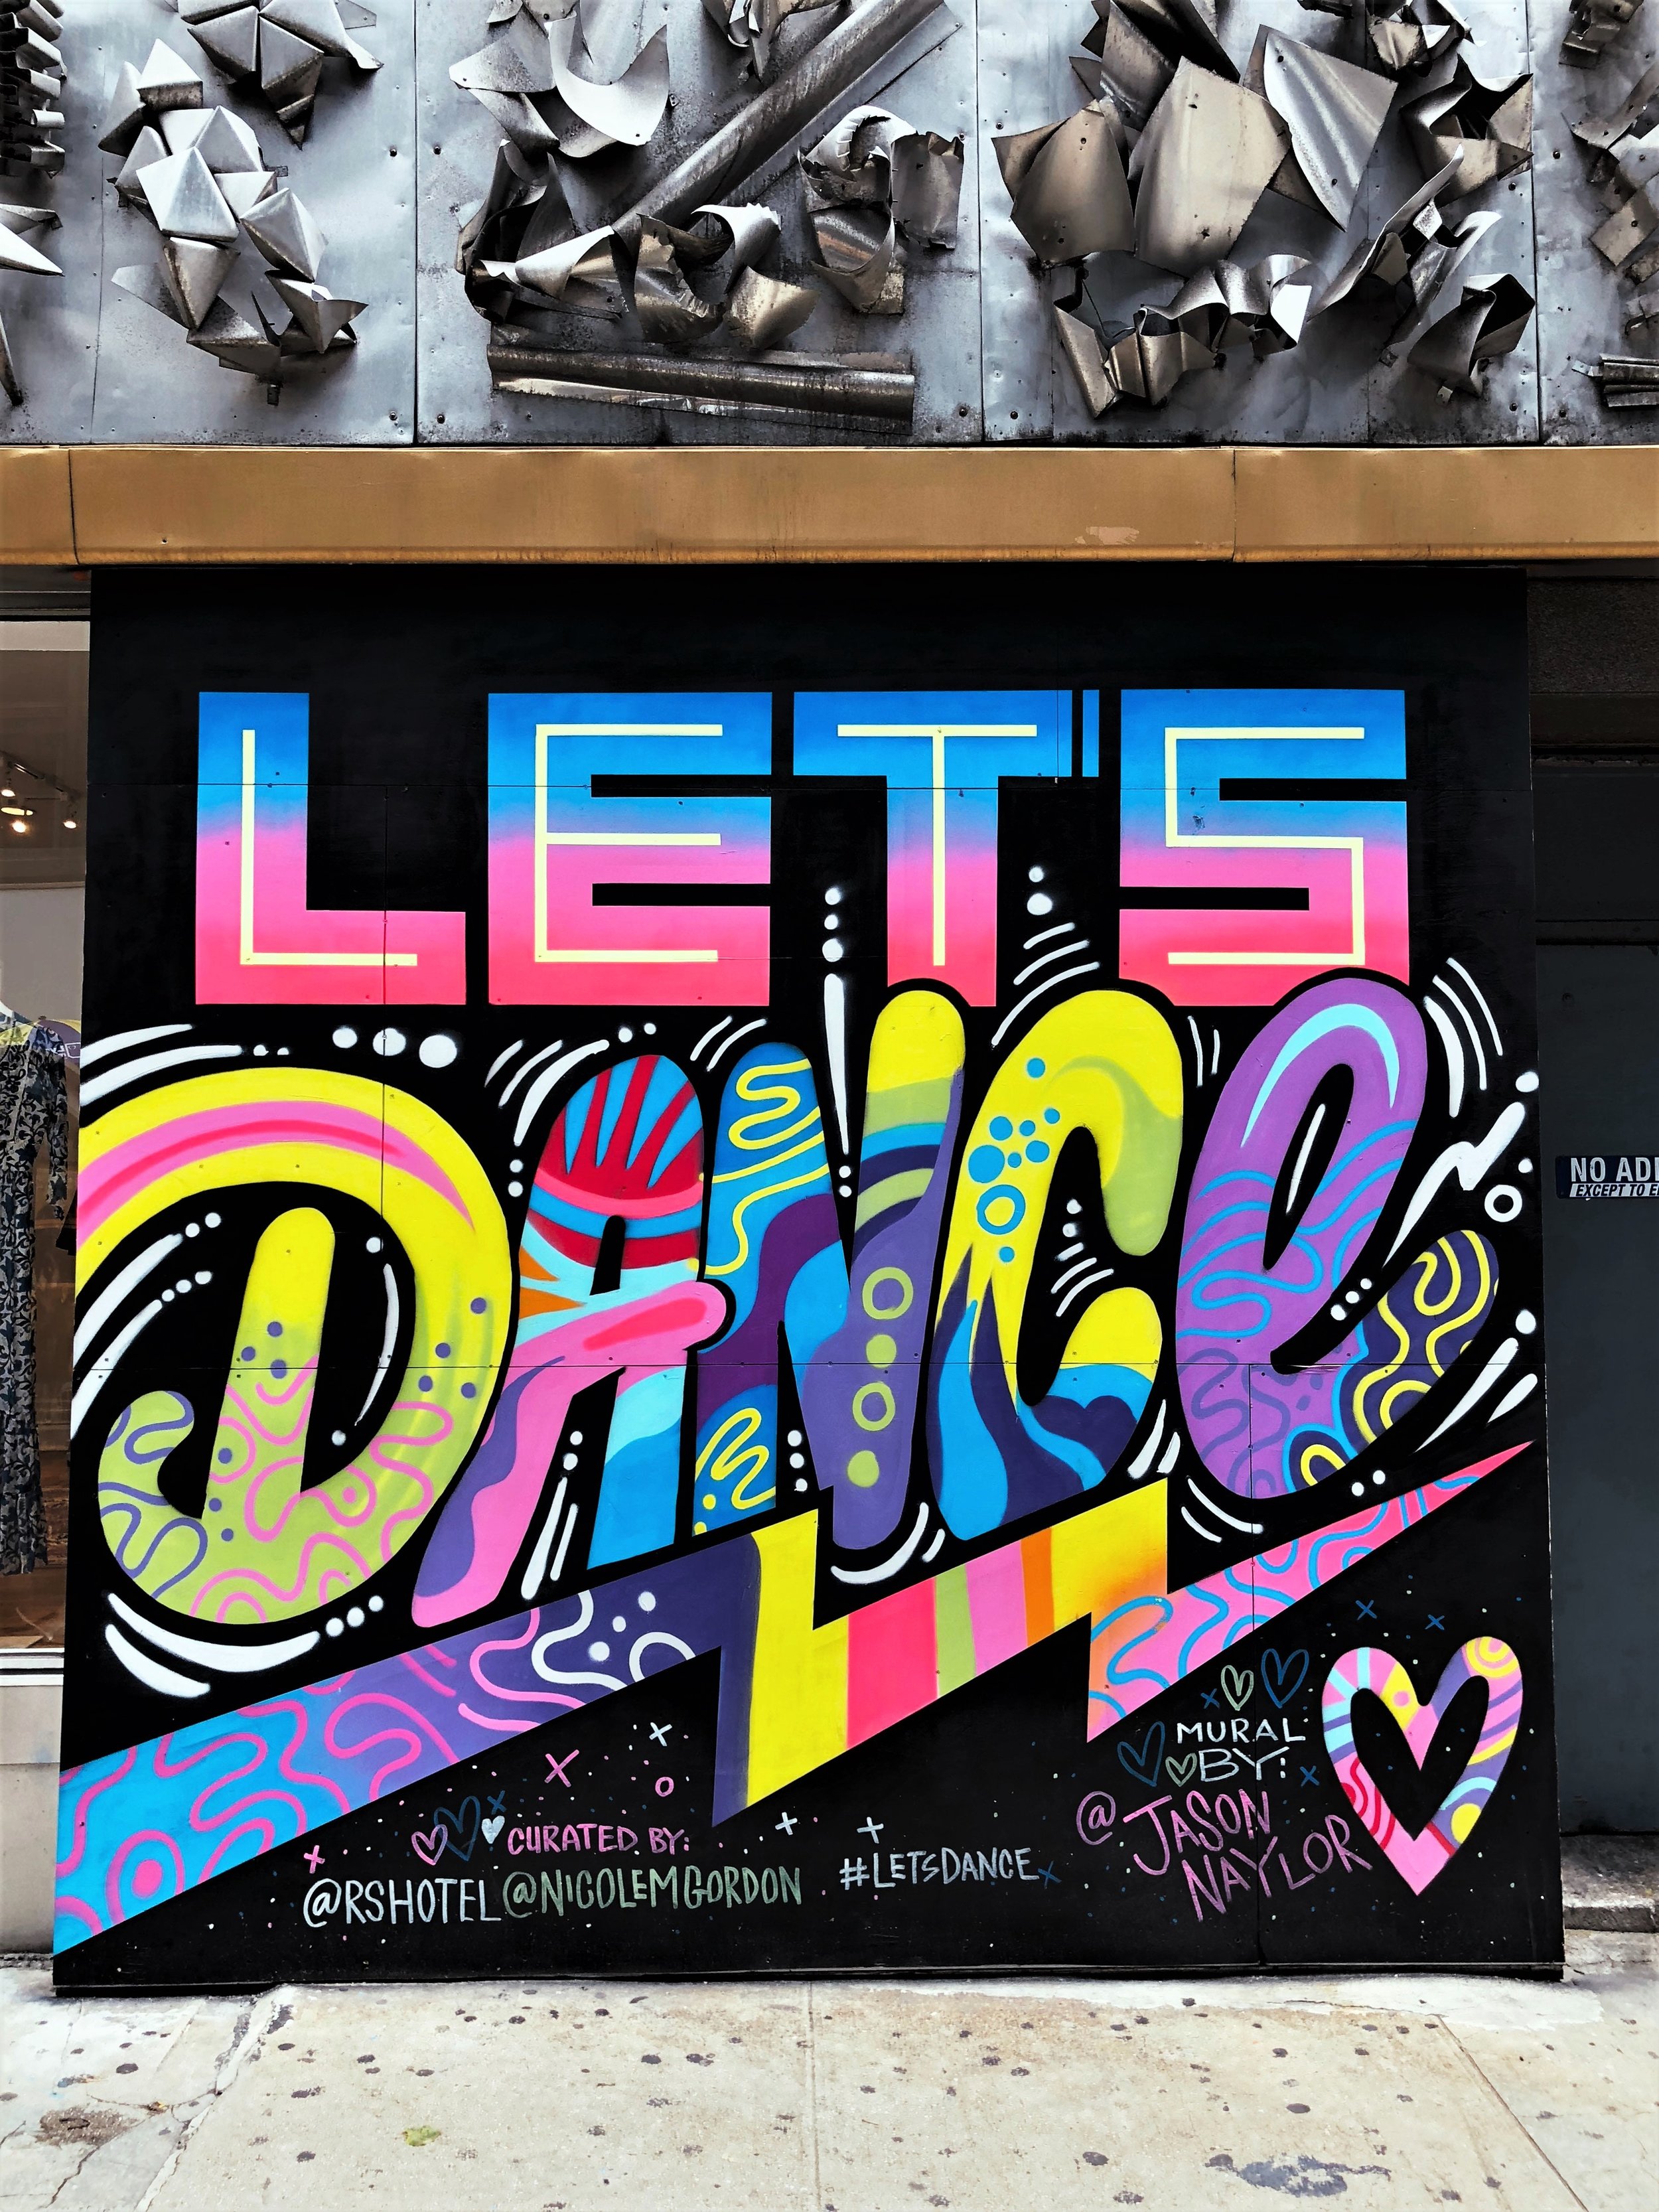 Let's dance mural on wall